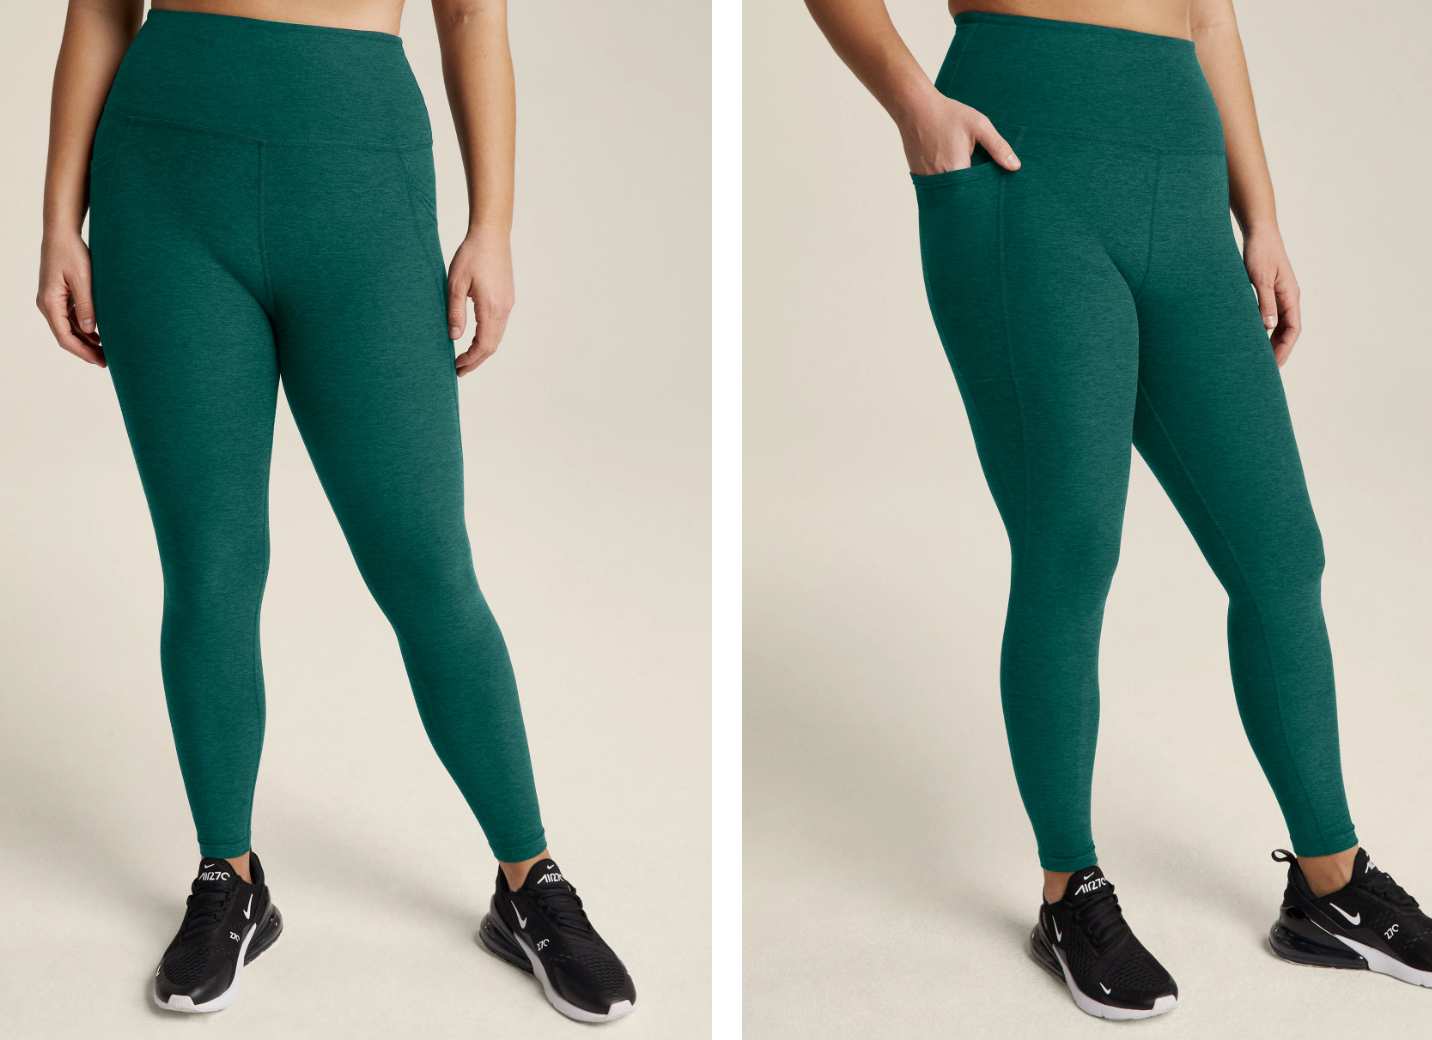 https://cdn.shopify.com/s/files/1/0426/0370/8568/t/15/assets/comfortable-green-leggings-for-thick-thighs-1692735002093.png?v=1692735003